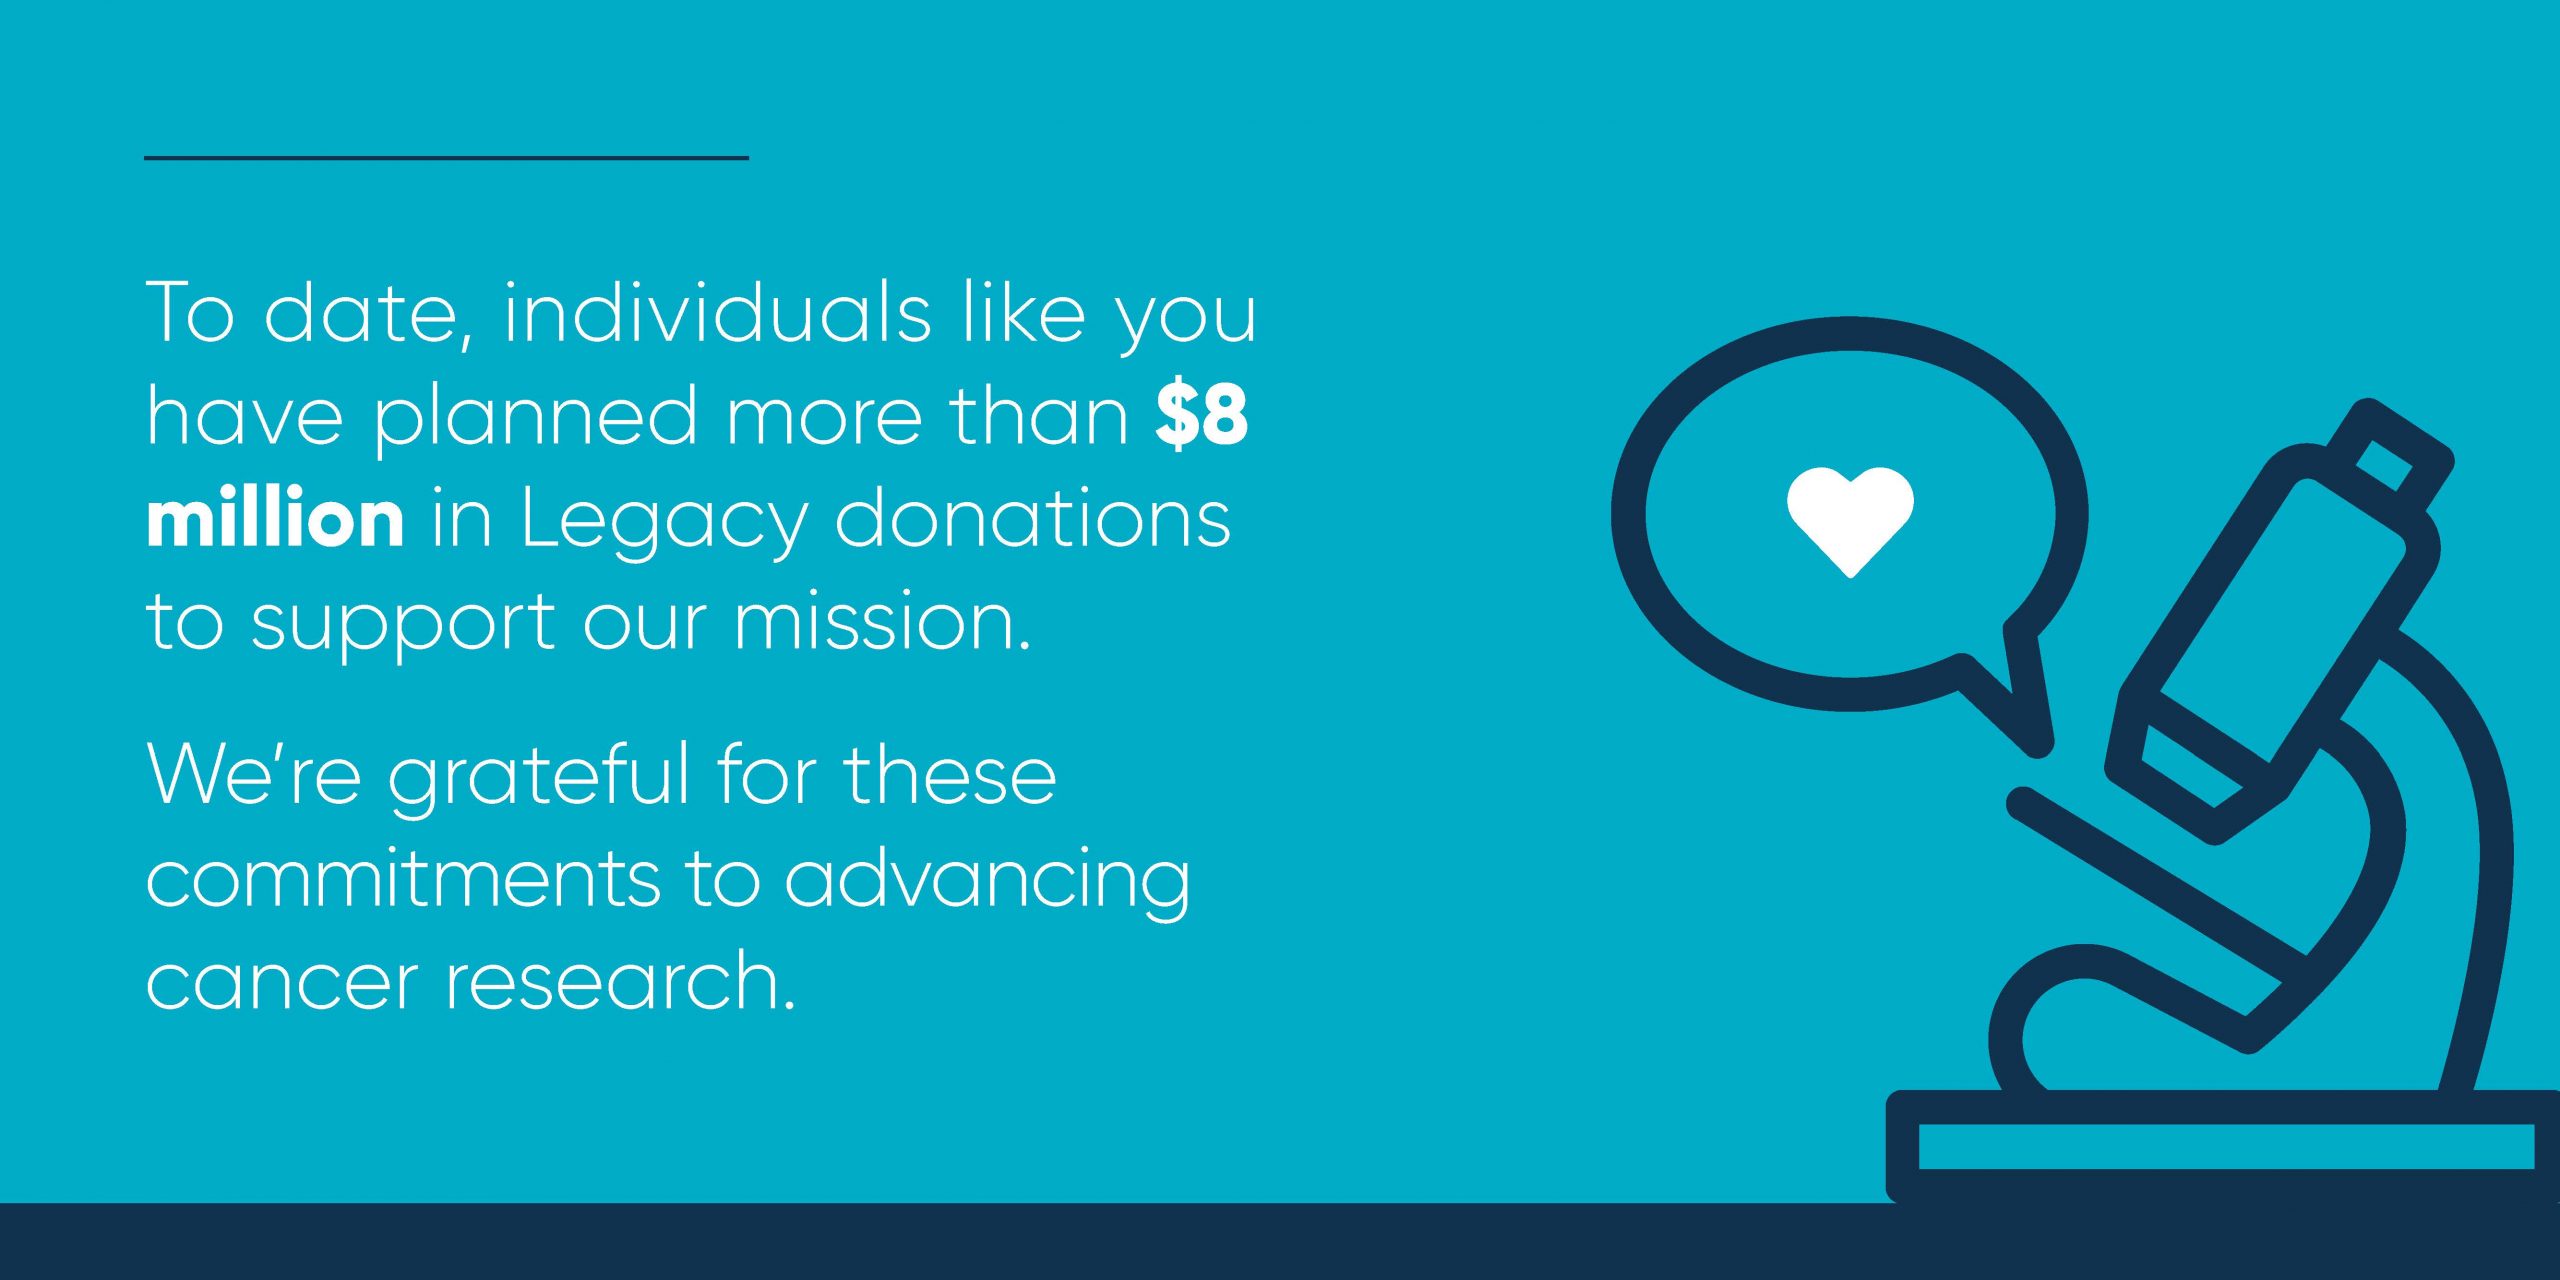 To date, individuals like you have planned more than $8 million in Legacy donations to support our mission.